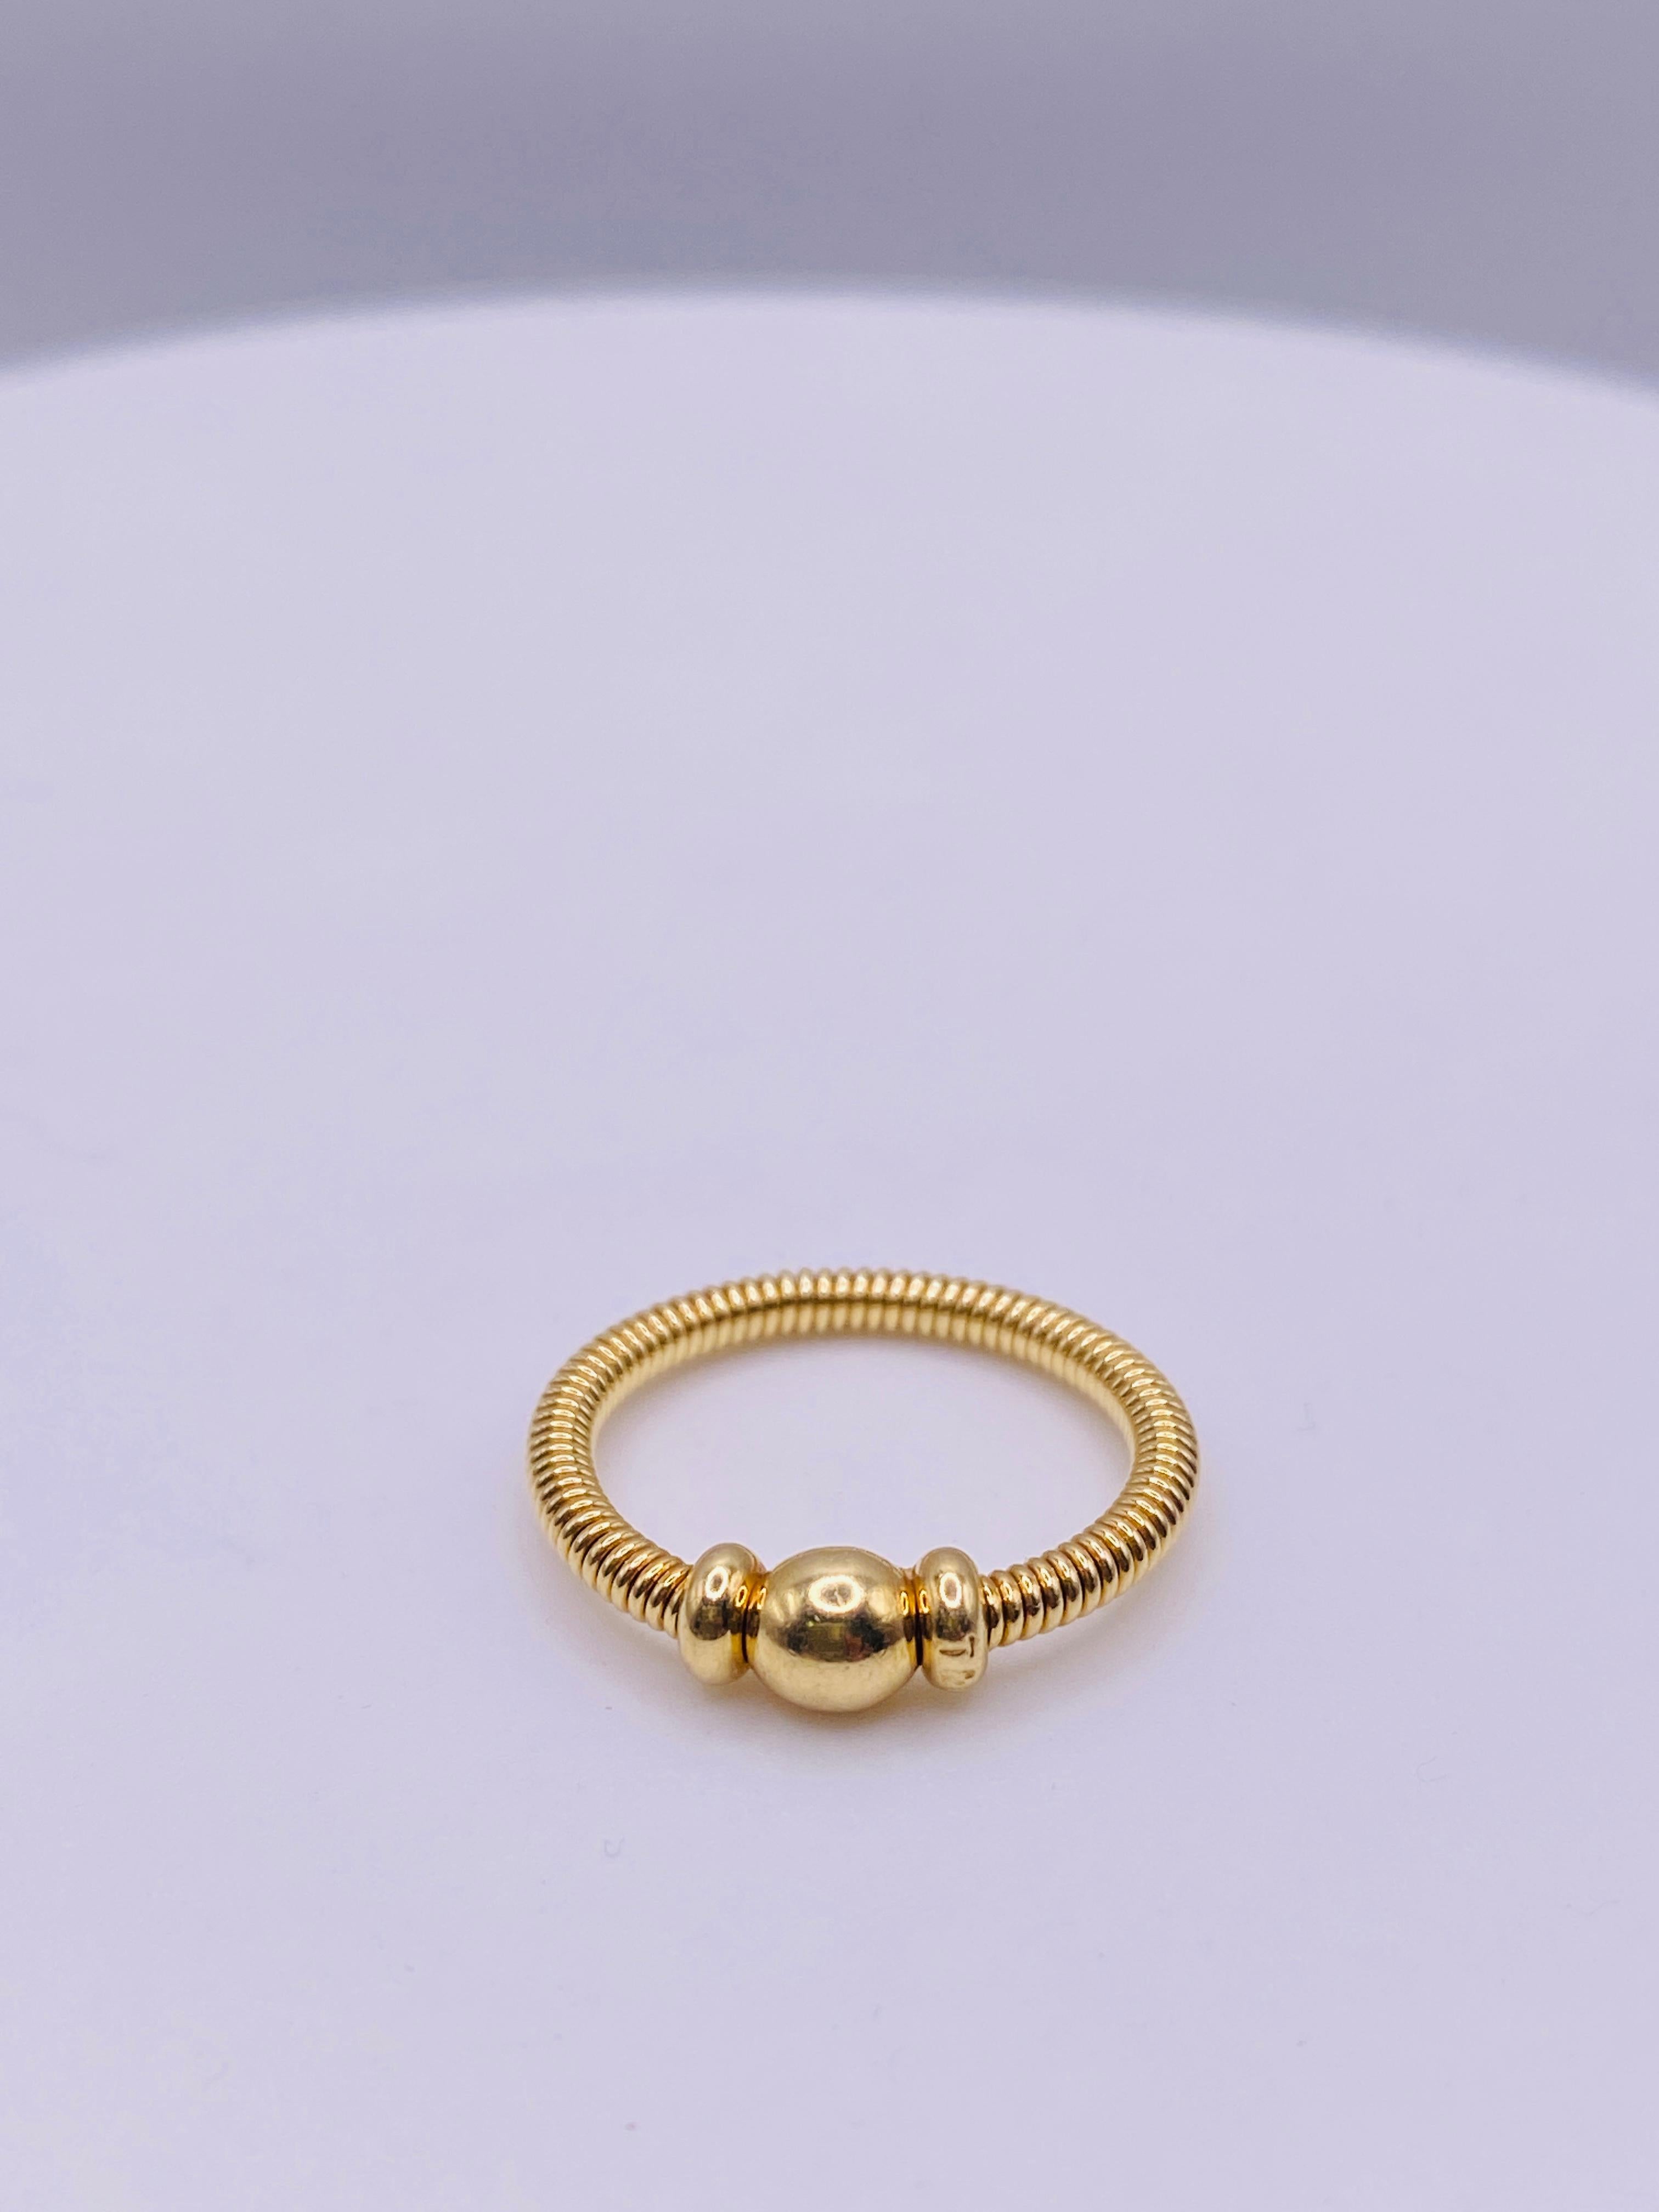 Tiffany & Co 750 18k yellow gold ring.  2.0Dwt. Size 4.5 US